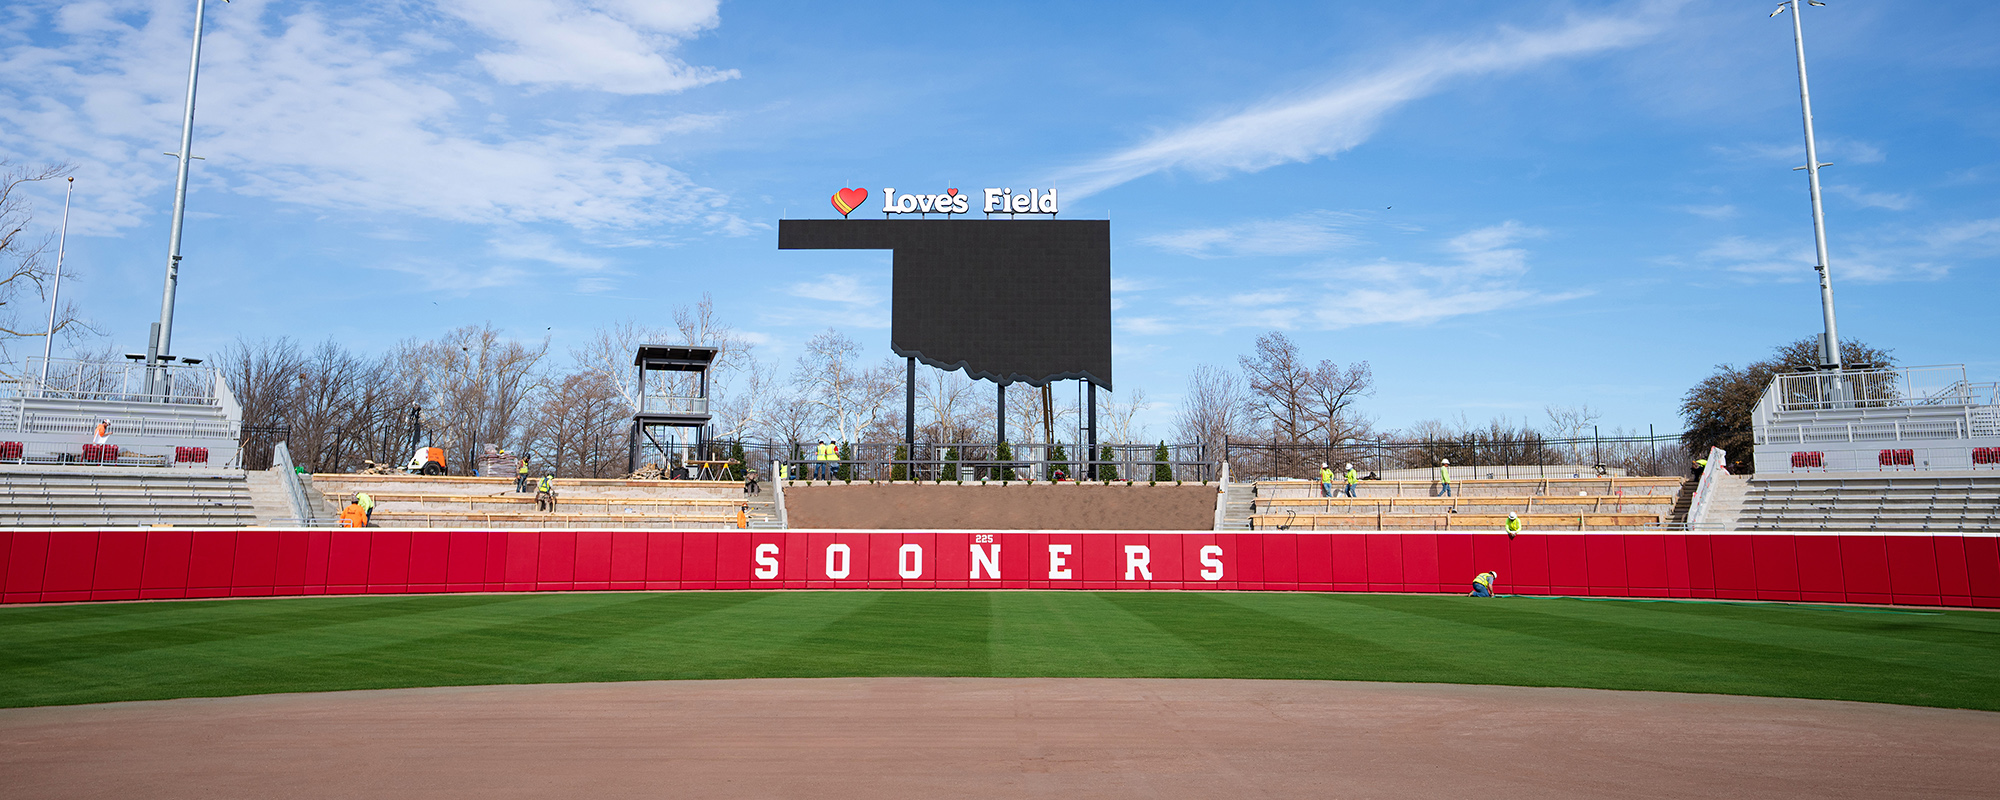 A photo of the scoreboard and construction at Love's Field at the University of Oklahoma